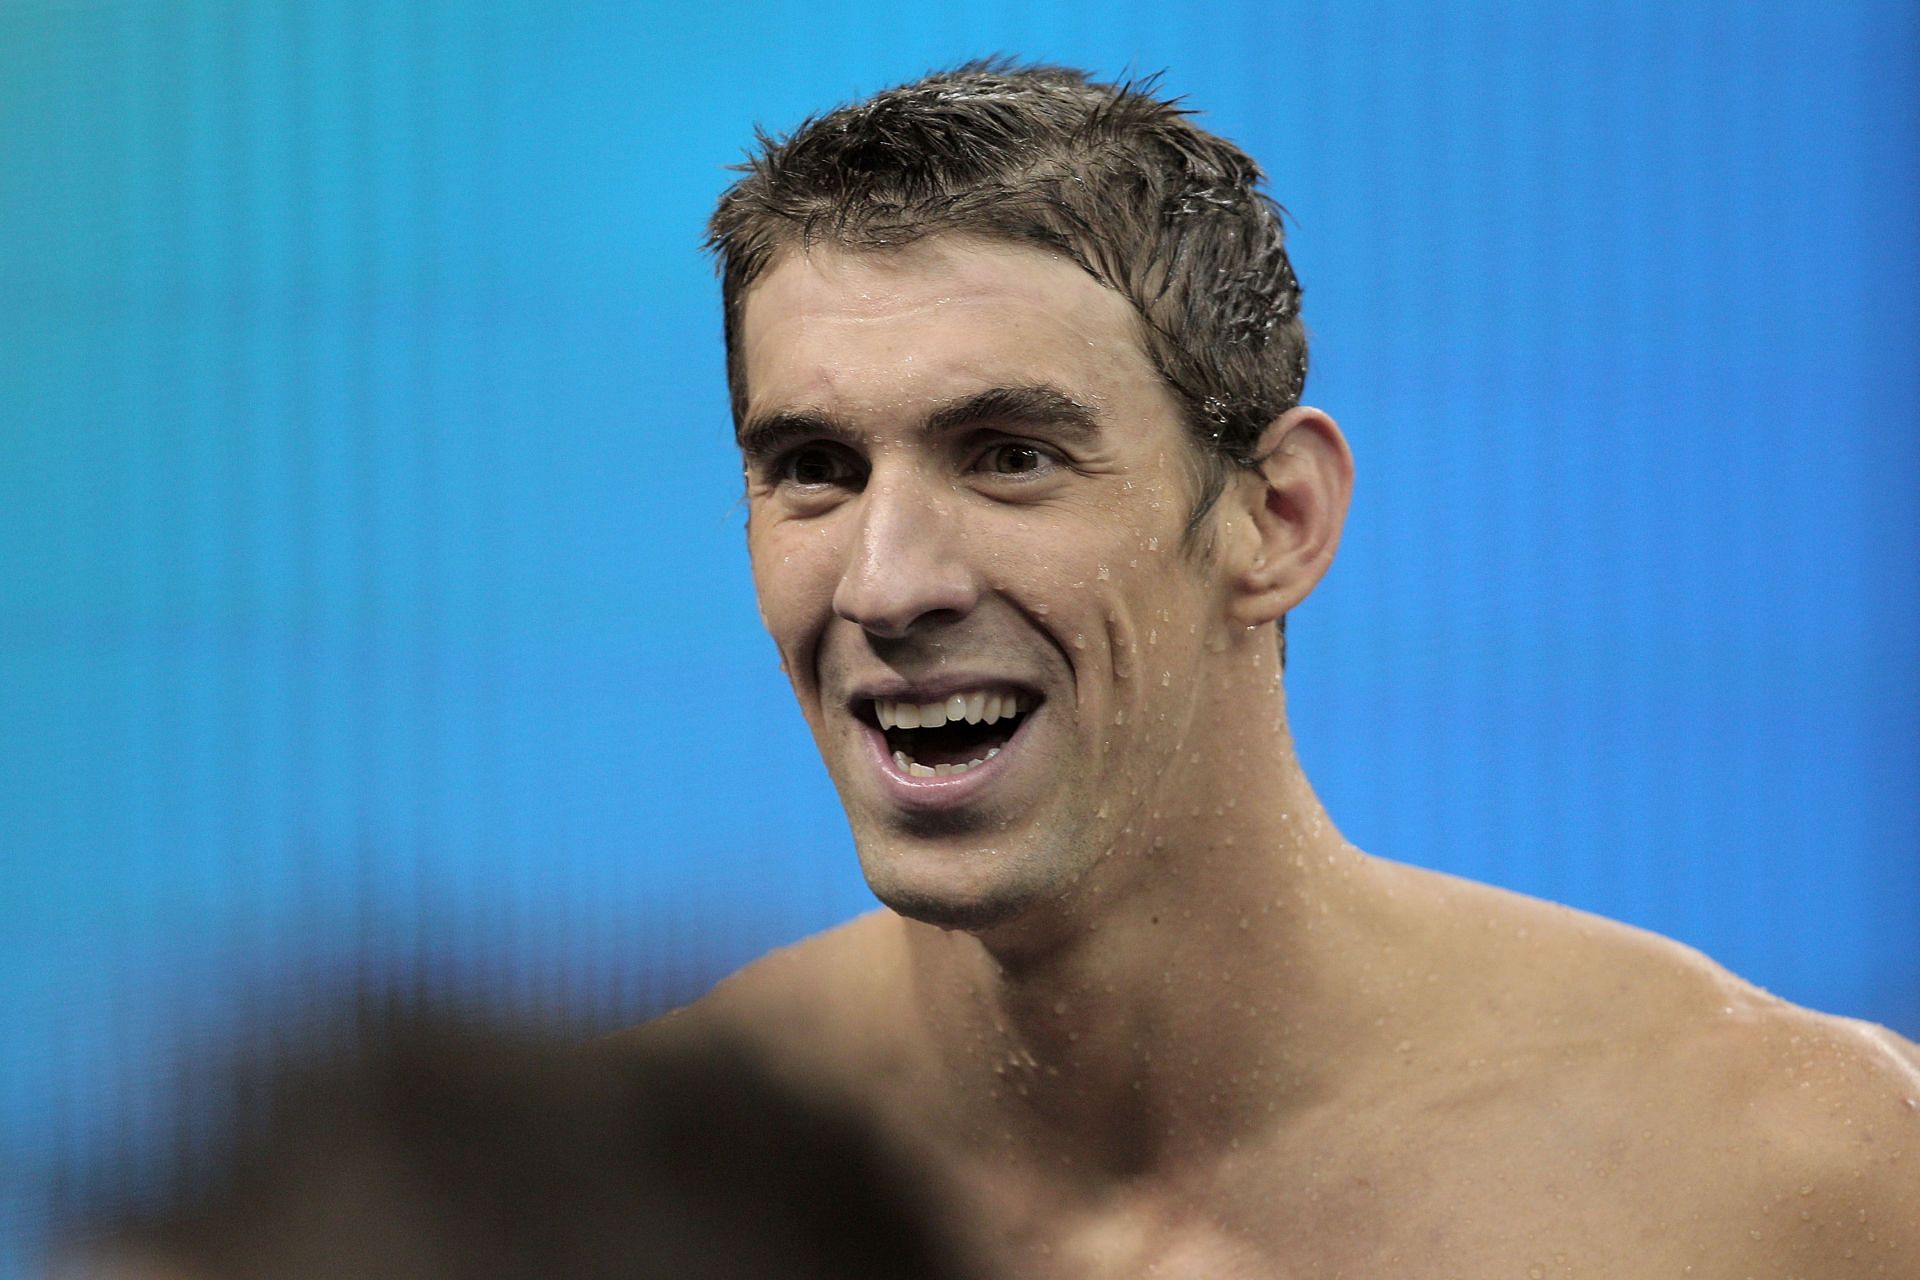 Phelps at the 14th FINA World Championships in 2011